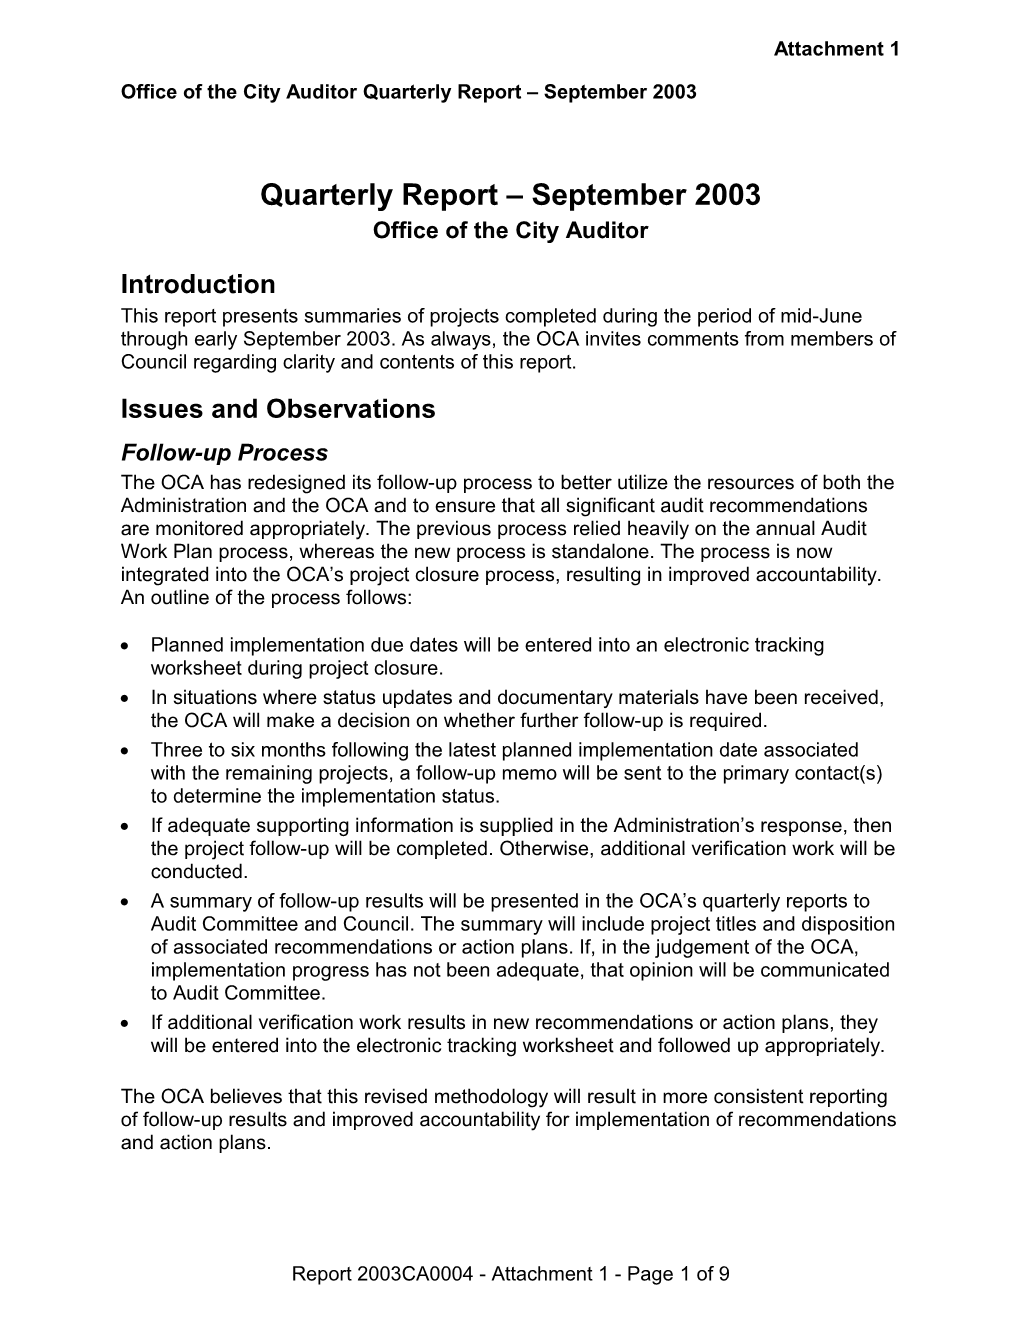 Report for Audit Committee September 11, 2003 Meeting